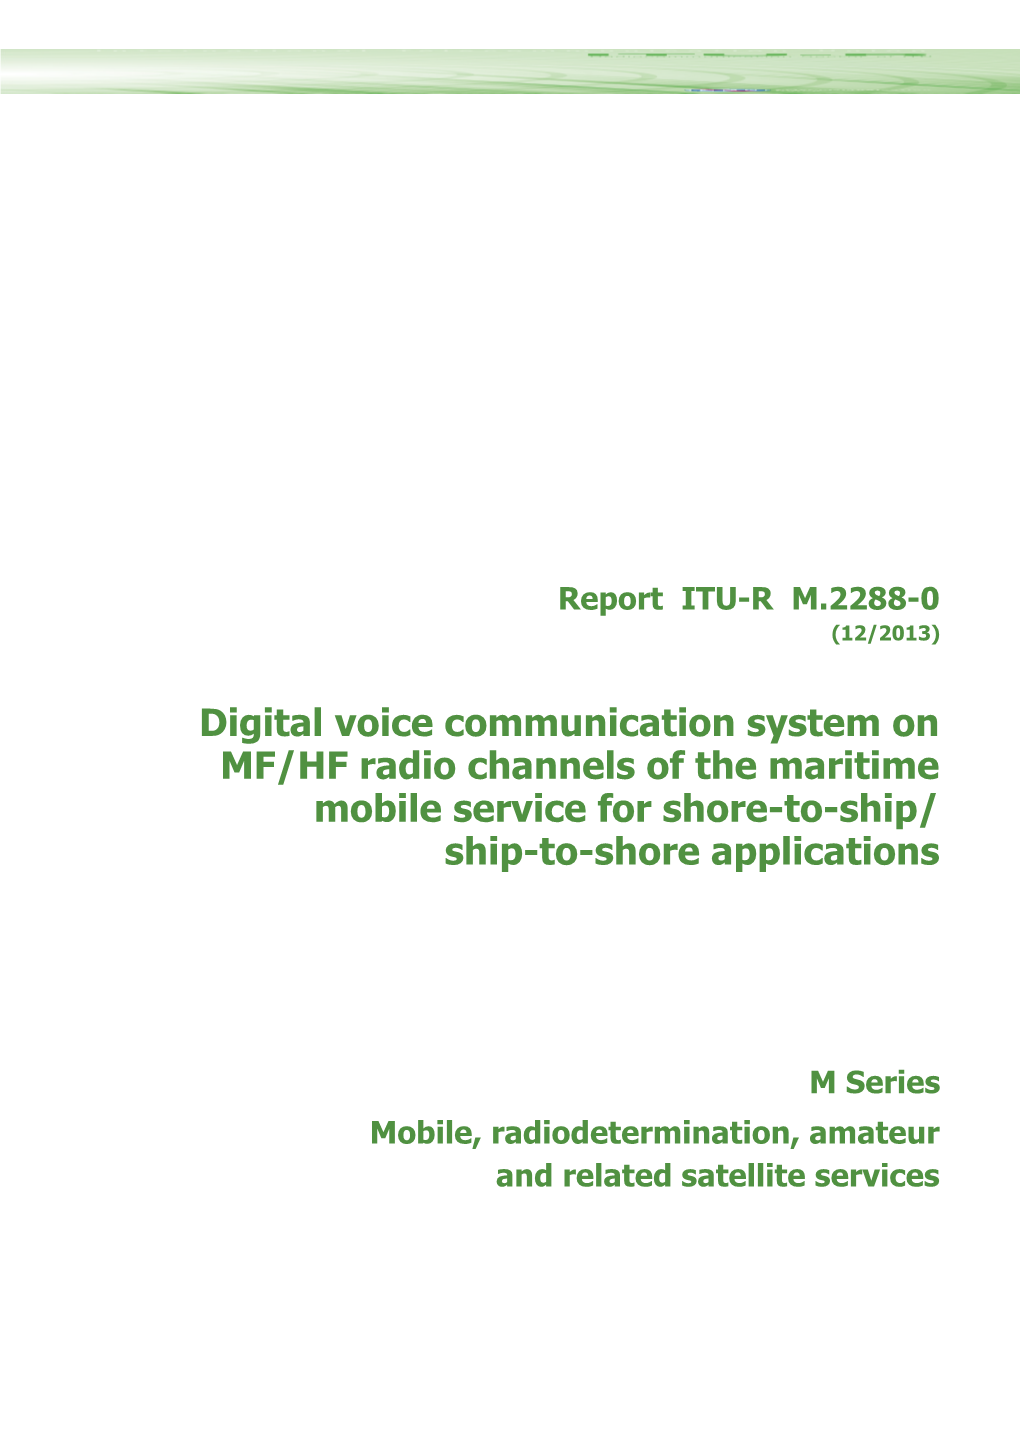 Digital Voice Communication System on MF/HF Radio Channels of the Maritime Mobile Service